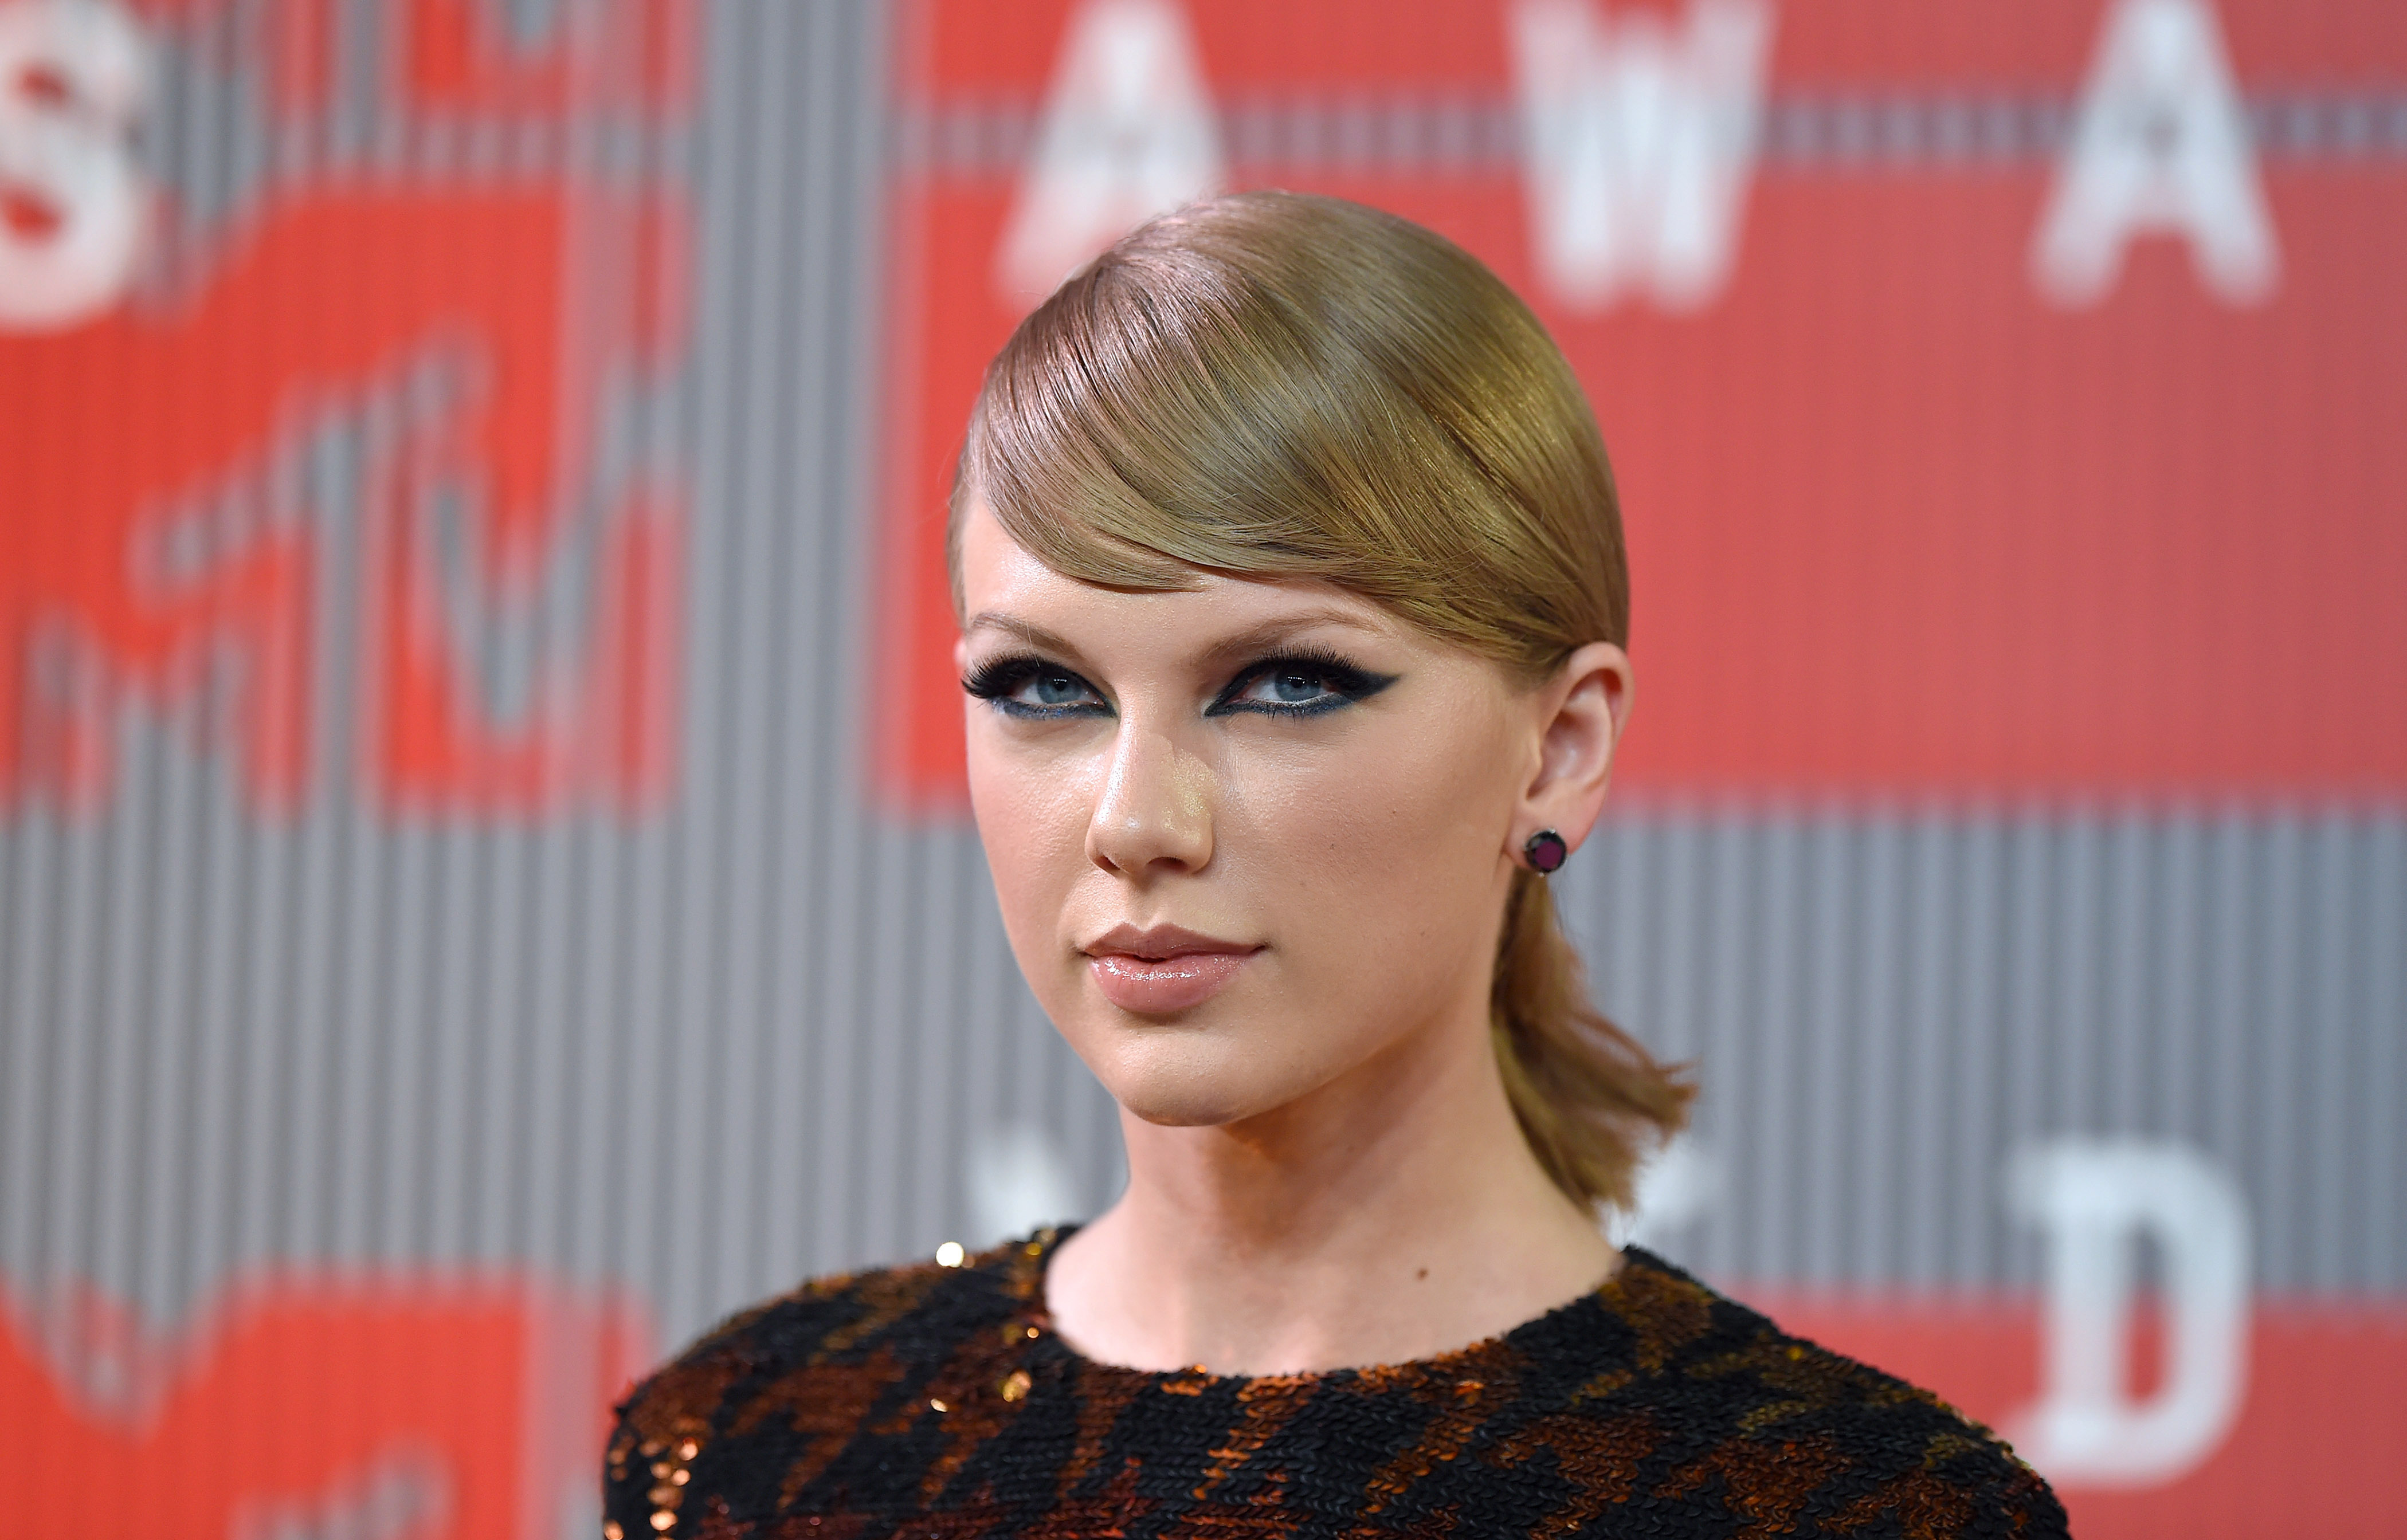 Taylor Swift at the 2015 MTV Video Music Awards in Los Angeles on Aug. 30, 2015. (Axelle—Bauer-Griffin/FilmMagic/Getty Images)